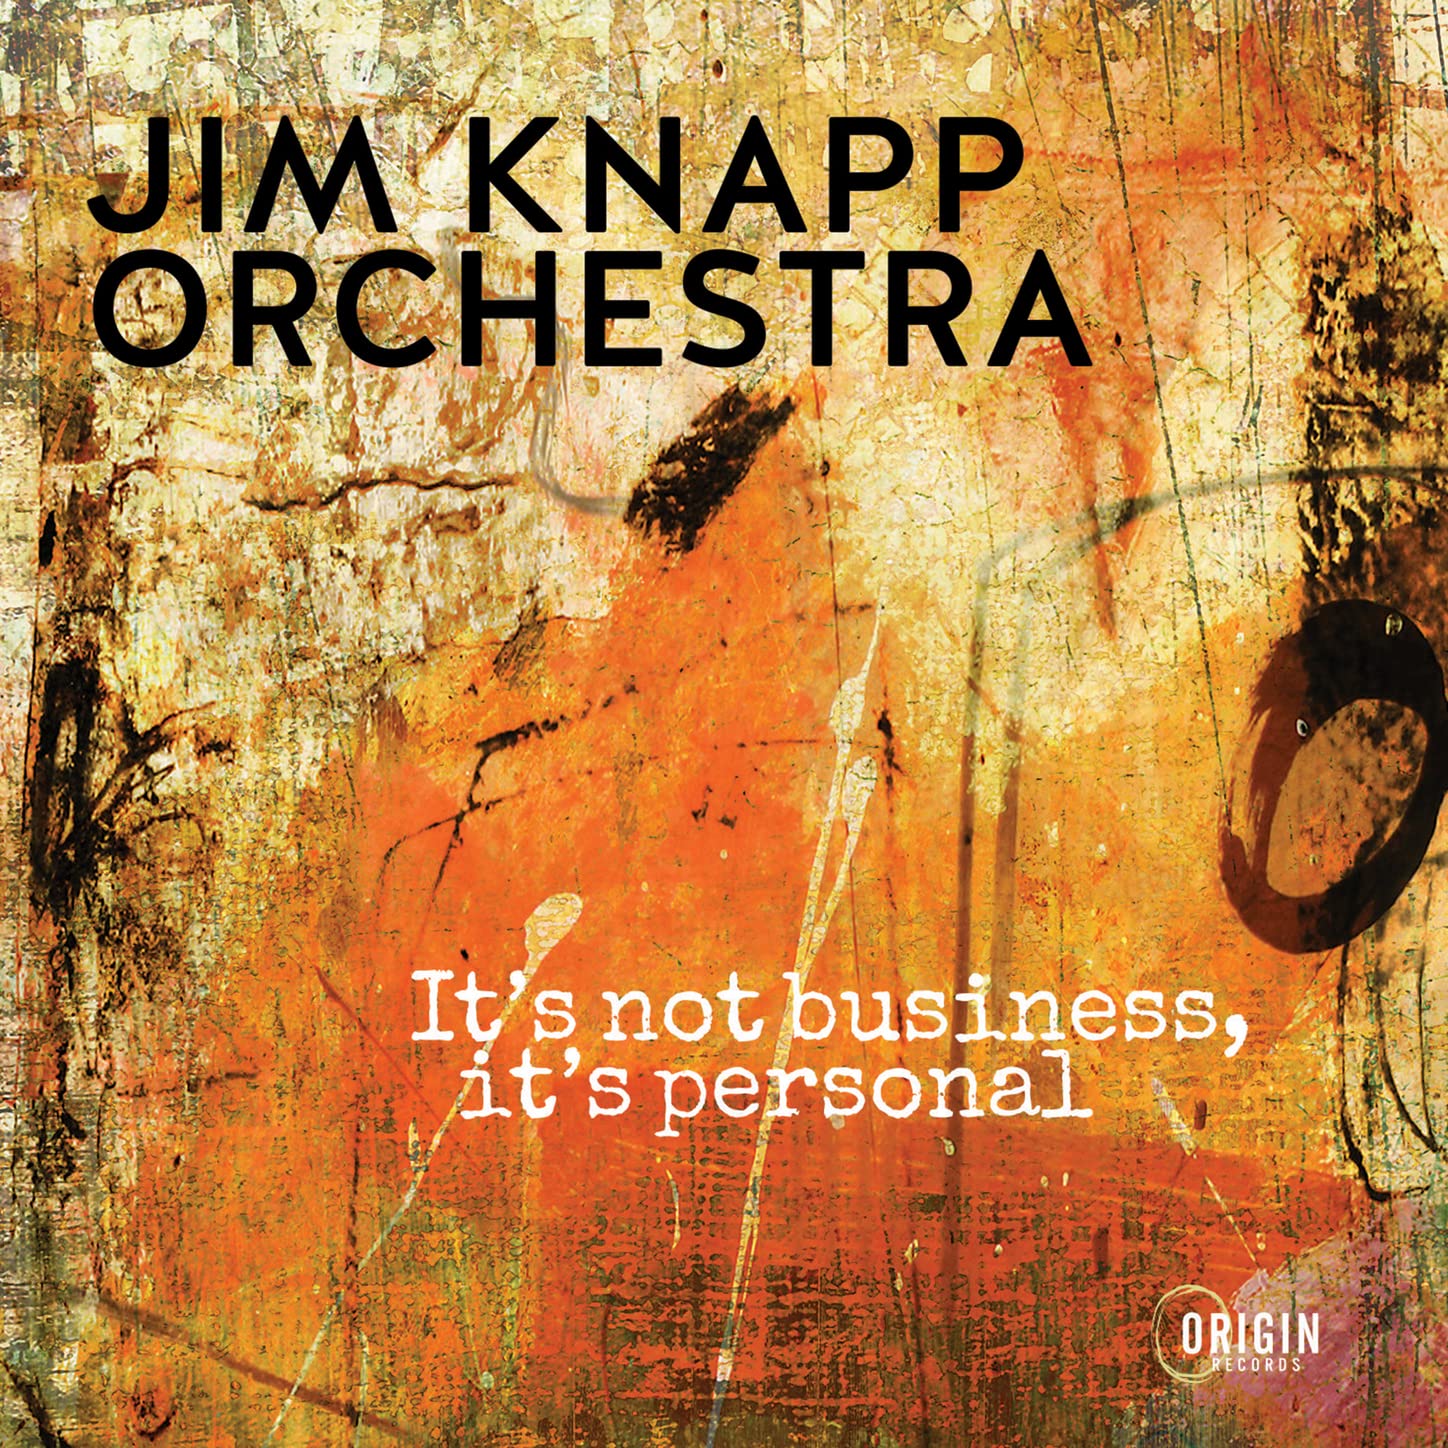 Jim Knapp Orchestra – It’s Not Business, It’s Personal (2021) [FLAC]